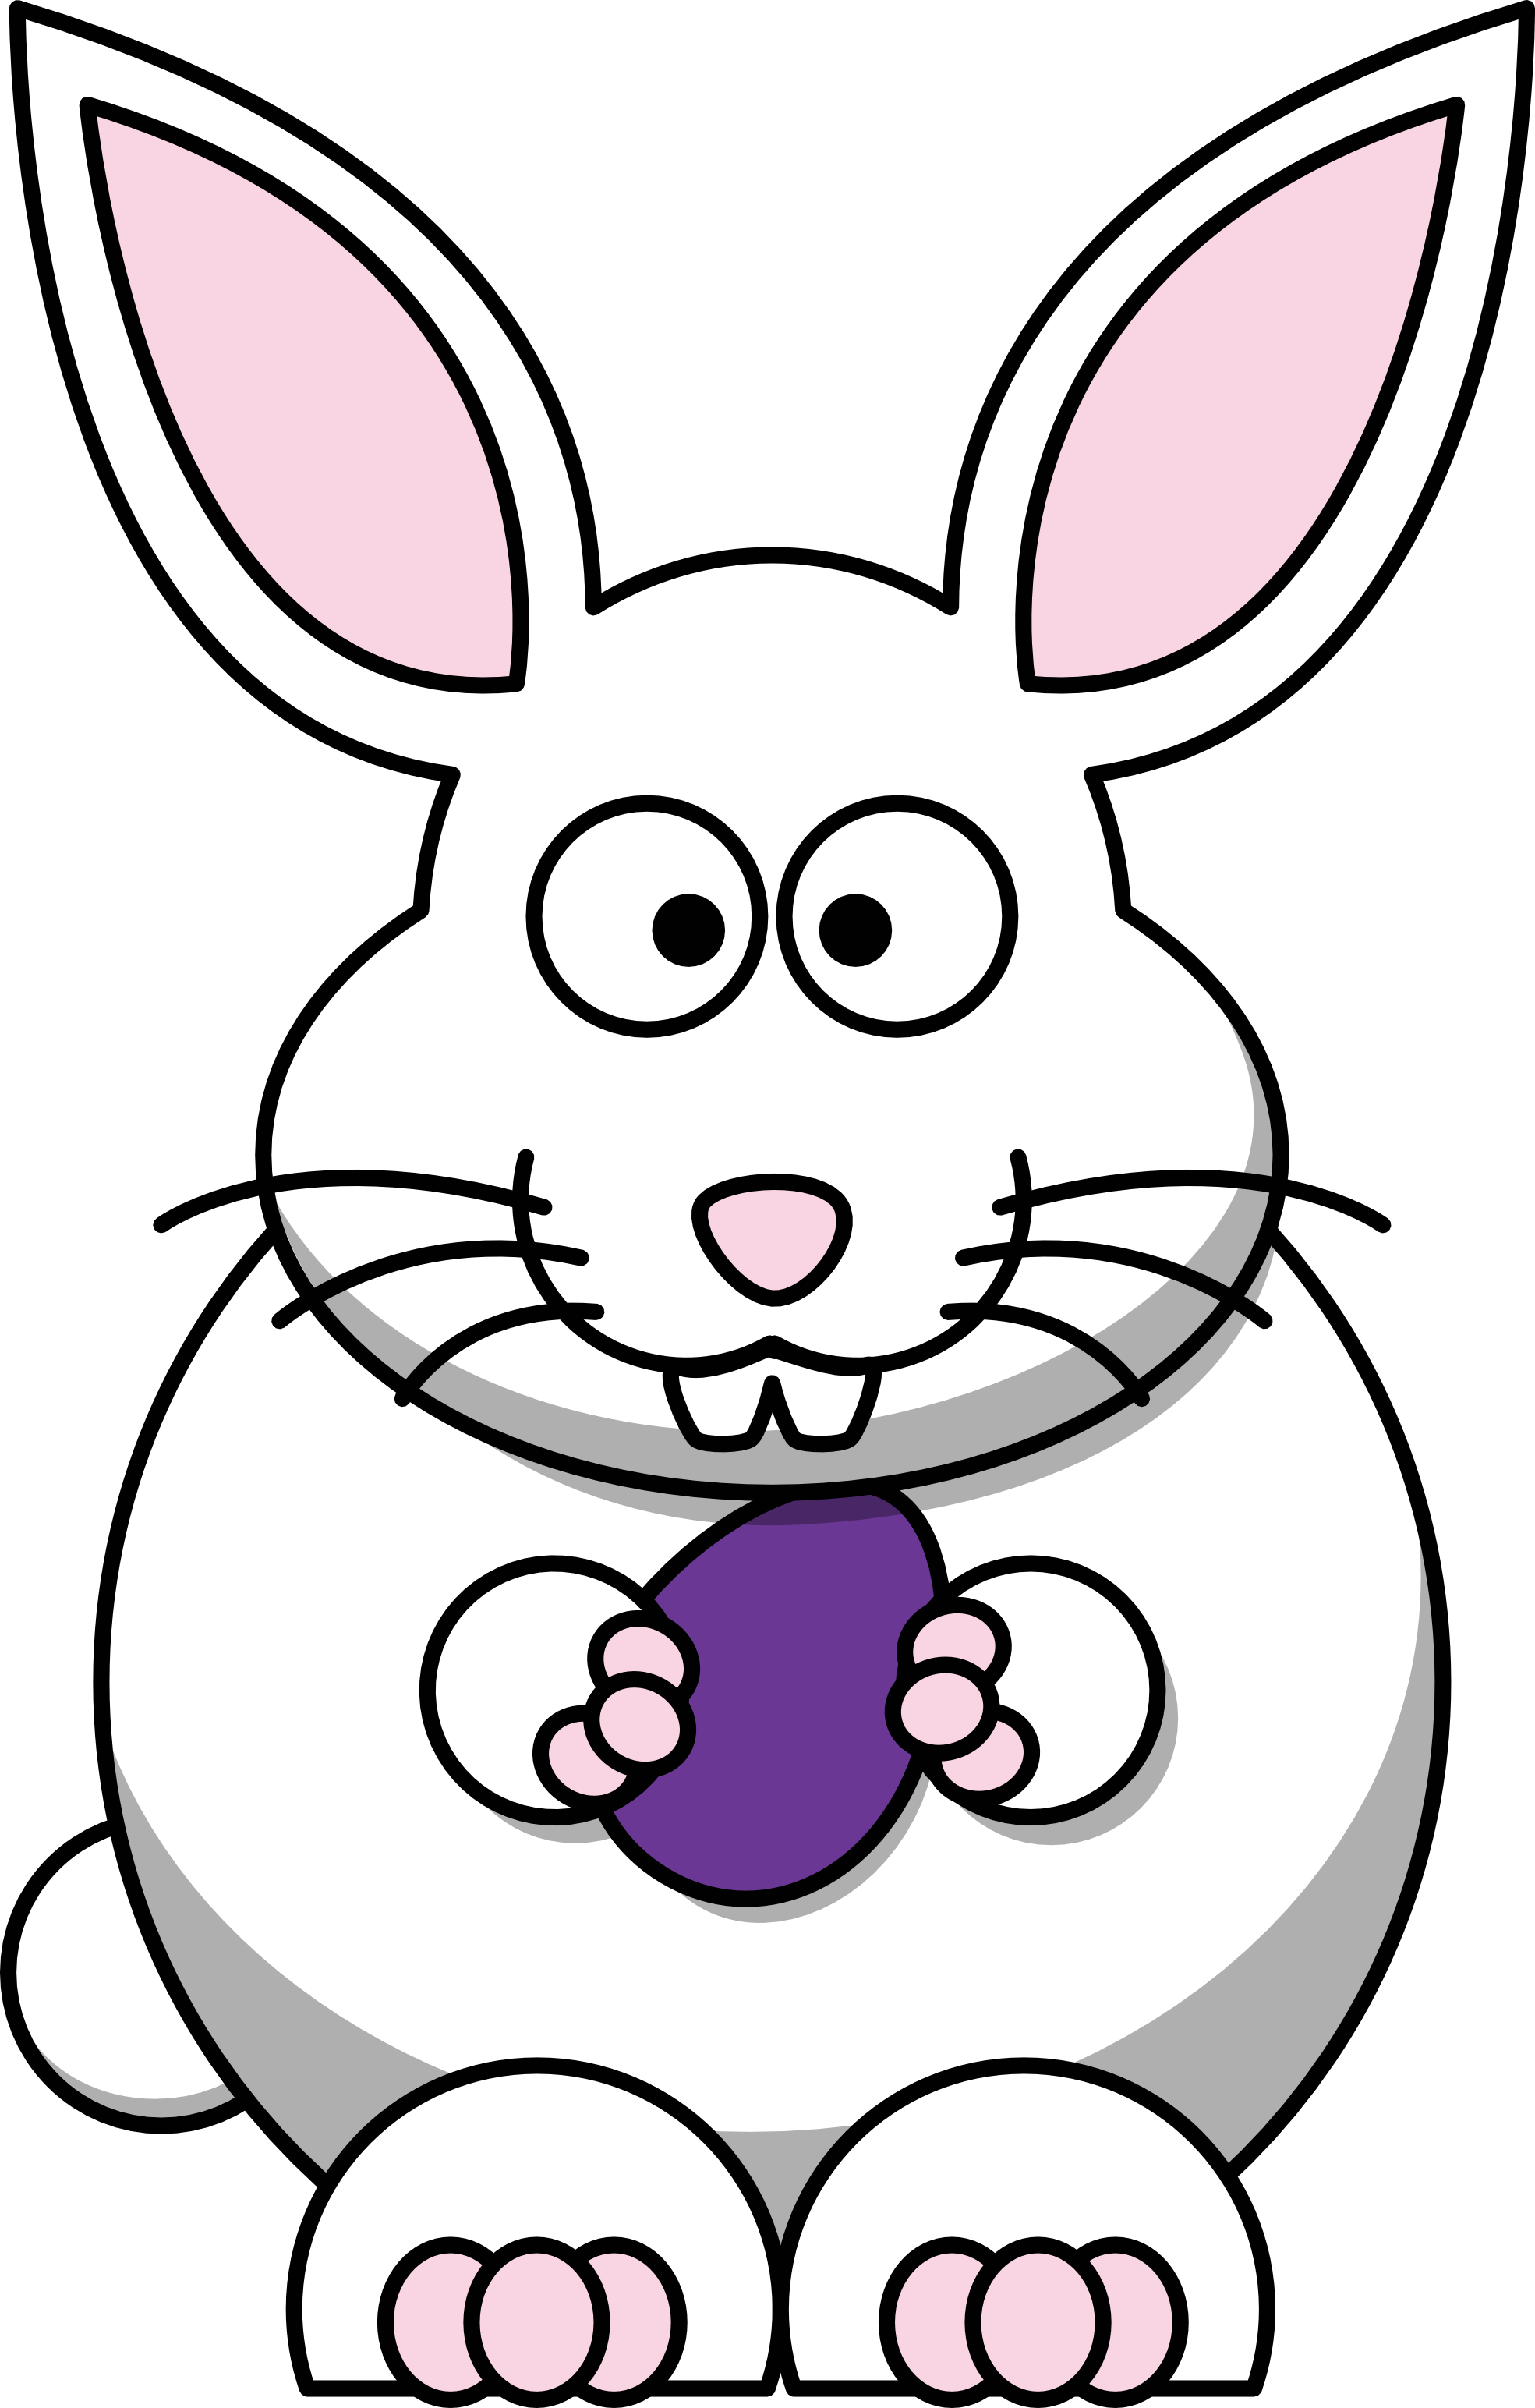 Free Cartoon Bunny Images, Download Free Clip Art, Free Clip